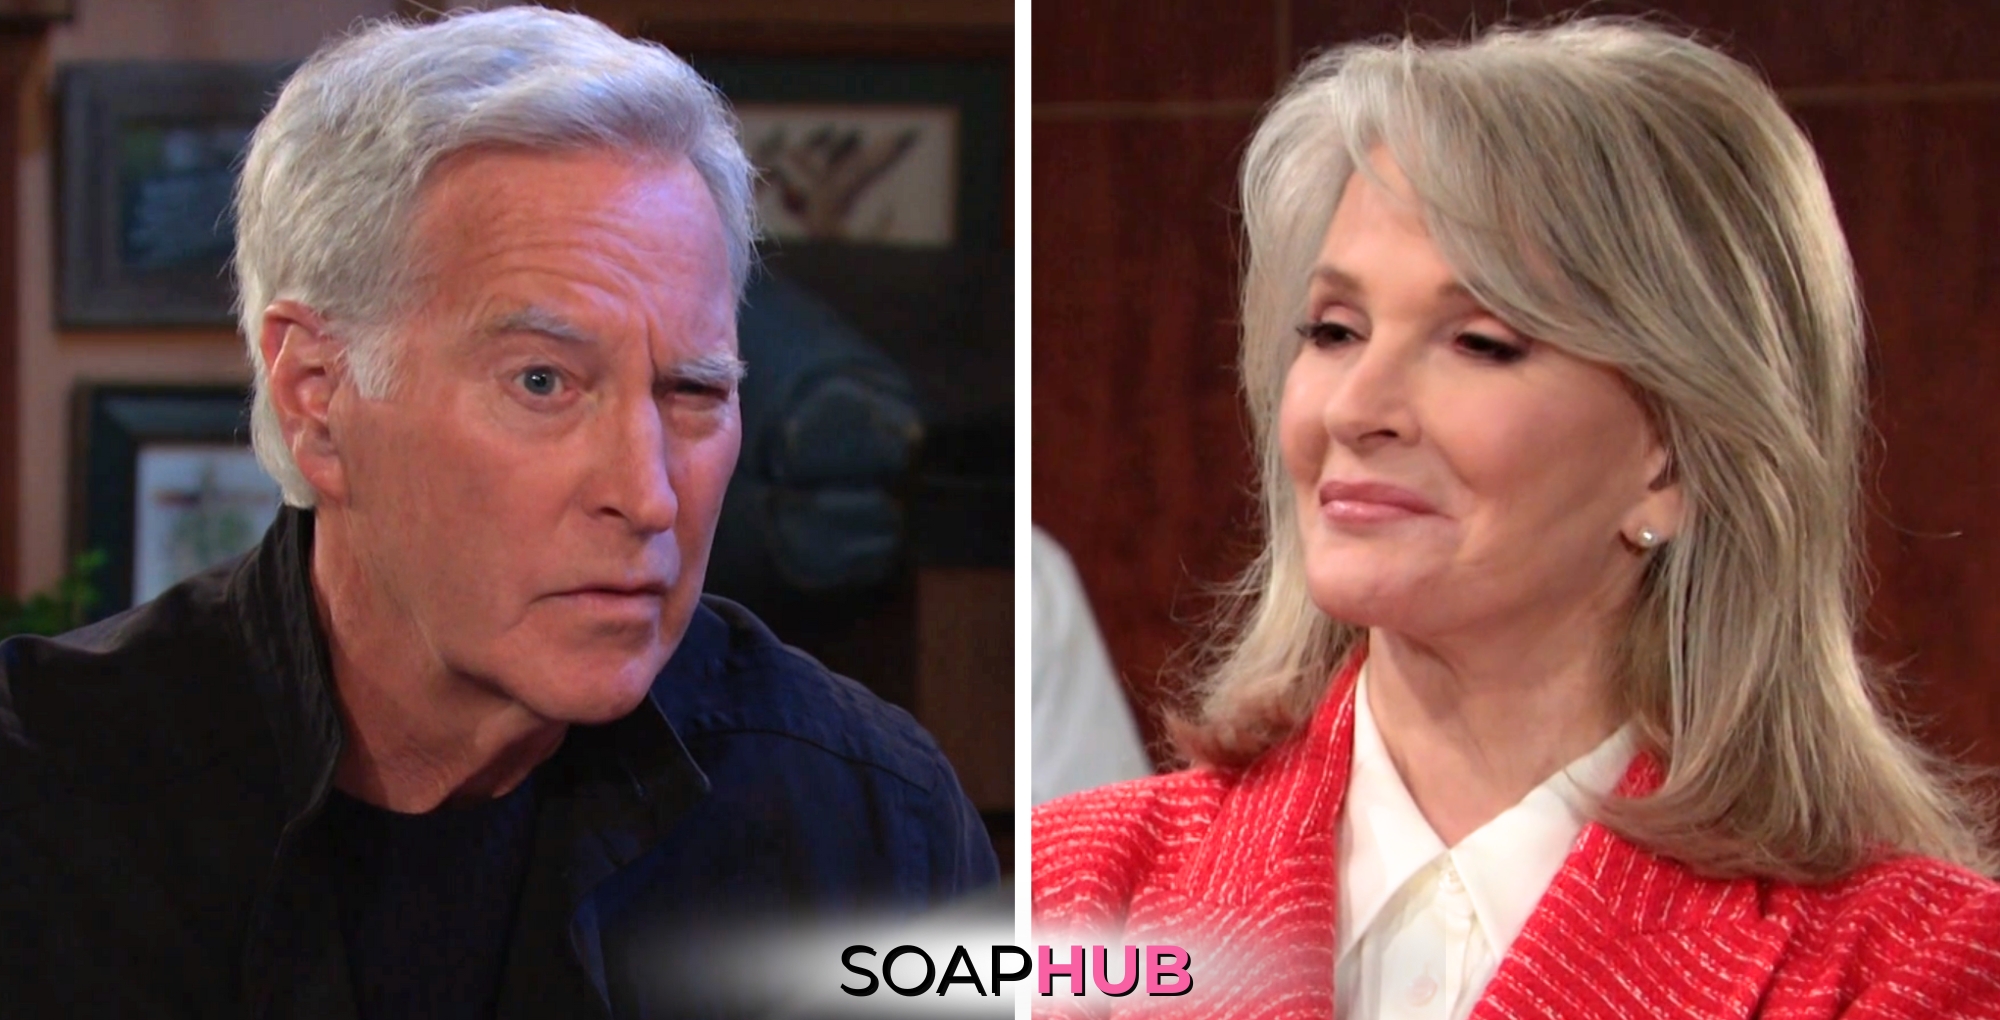 Days of our Lives spoilers for Monday, March 18 feature John and Marlena with the Soap Hub logo across the bottom.